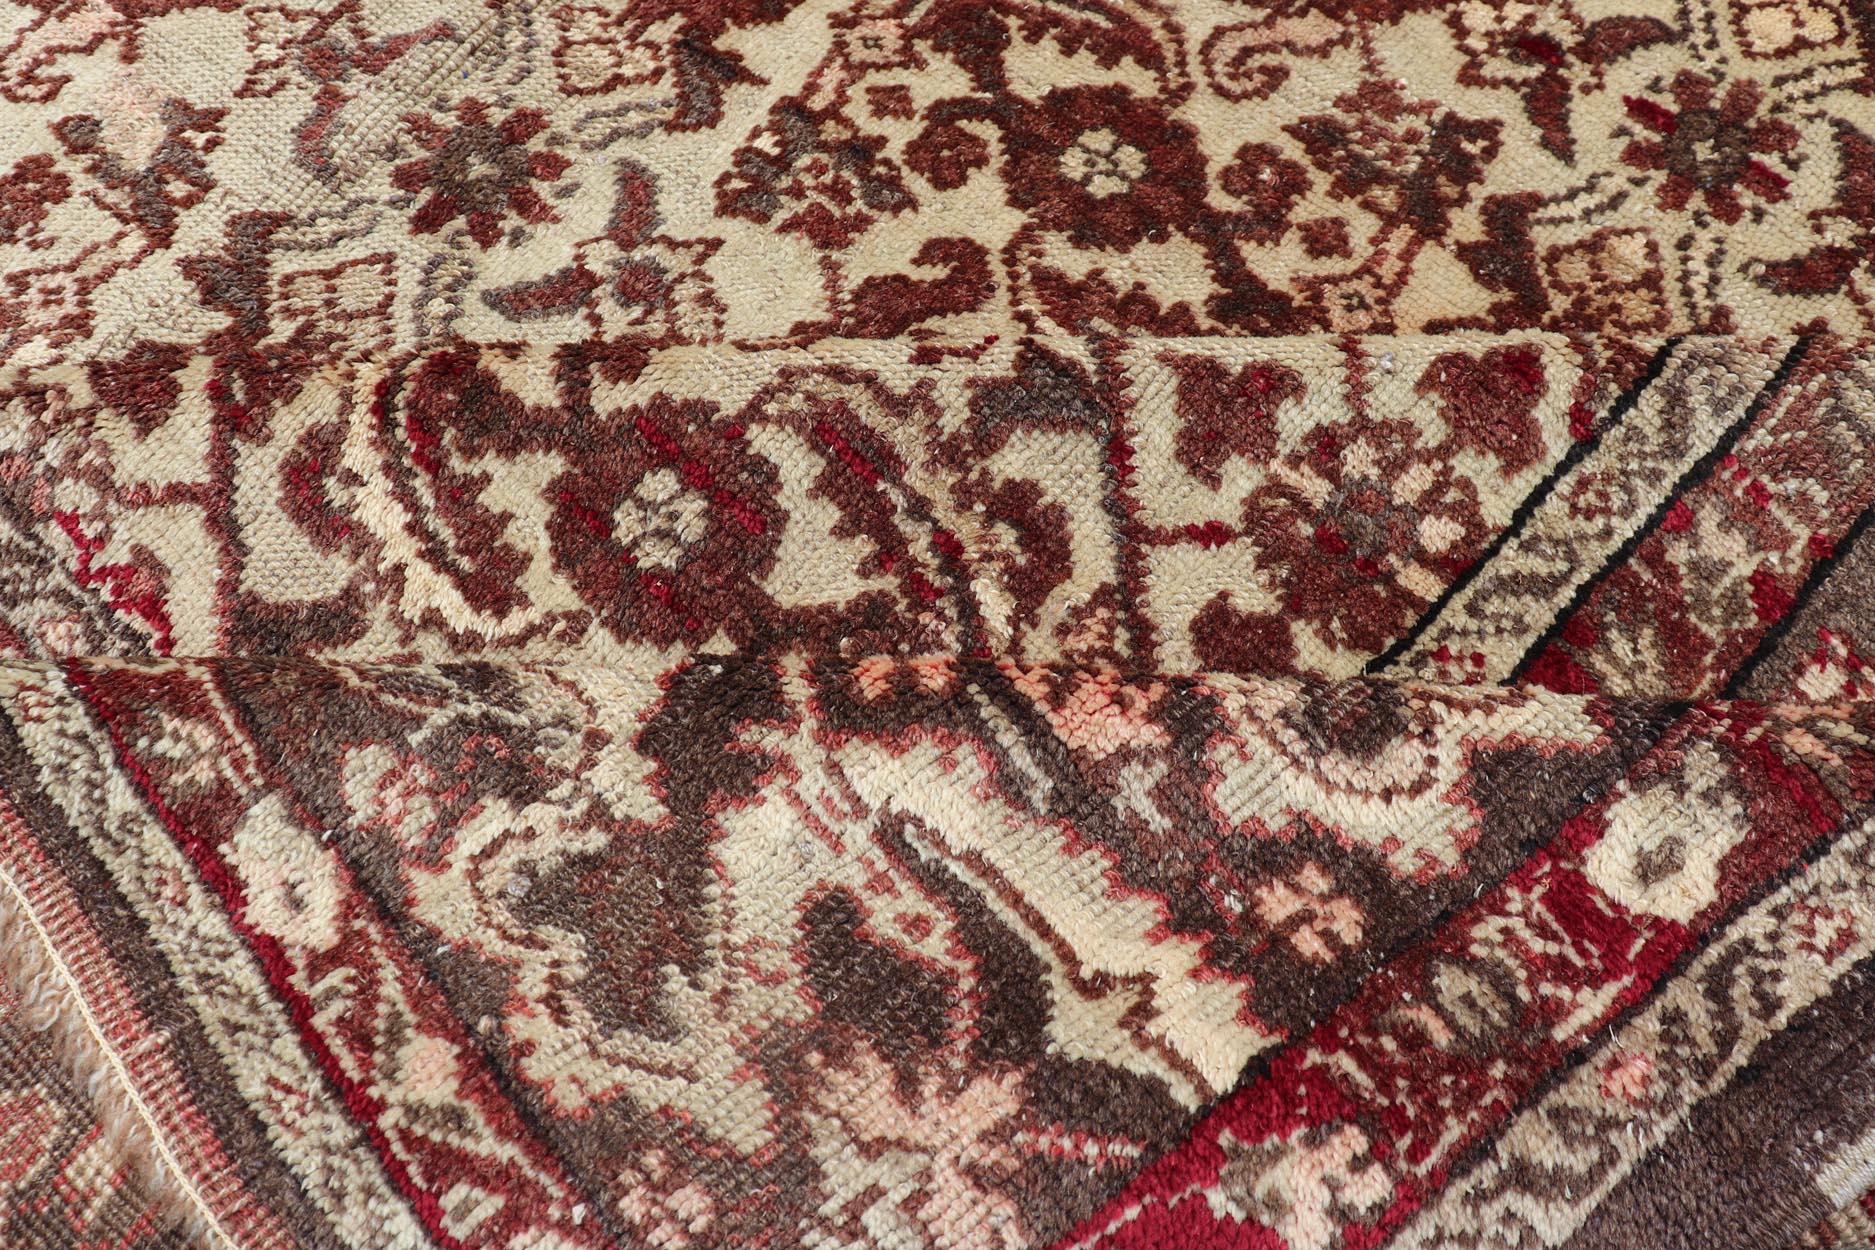 20th Century Antique Turkish Sivas Rug with Tan Background and Maroon, Eggplant, Brown Color  For Sale